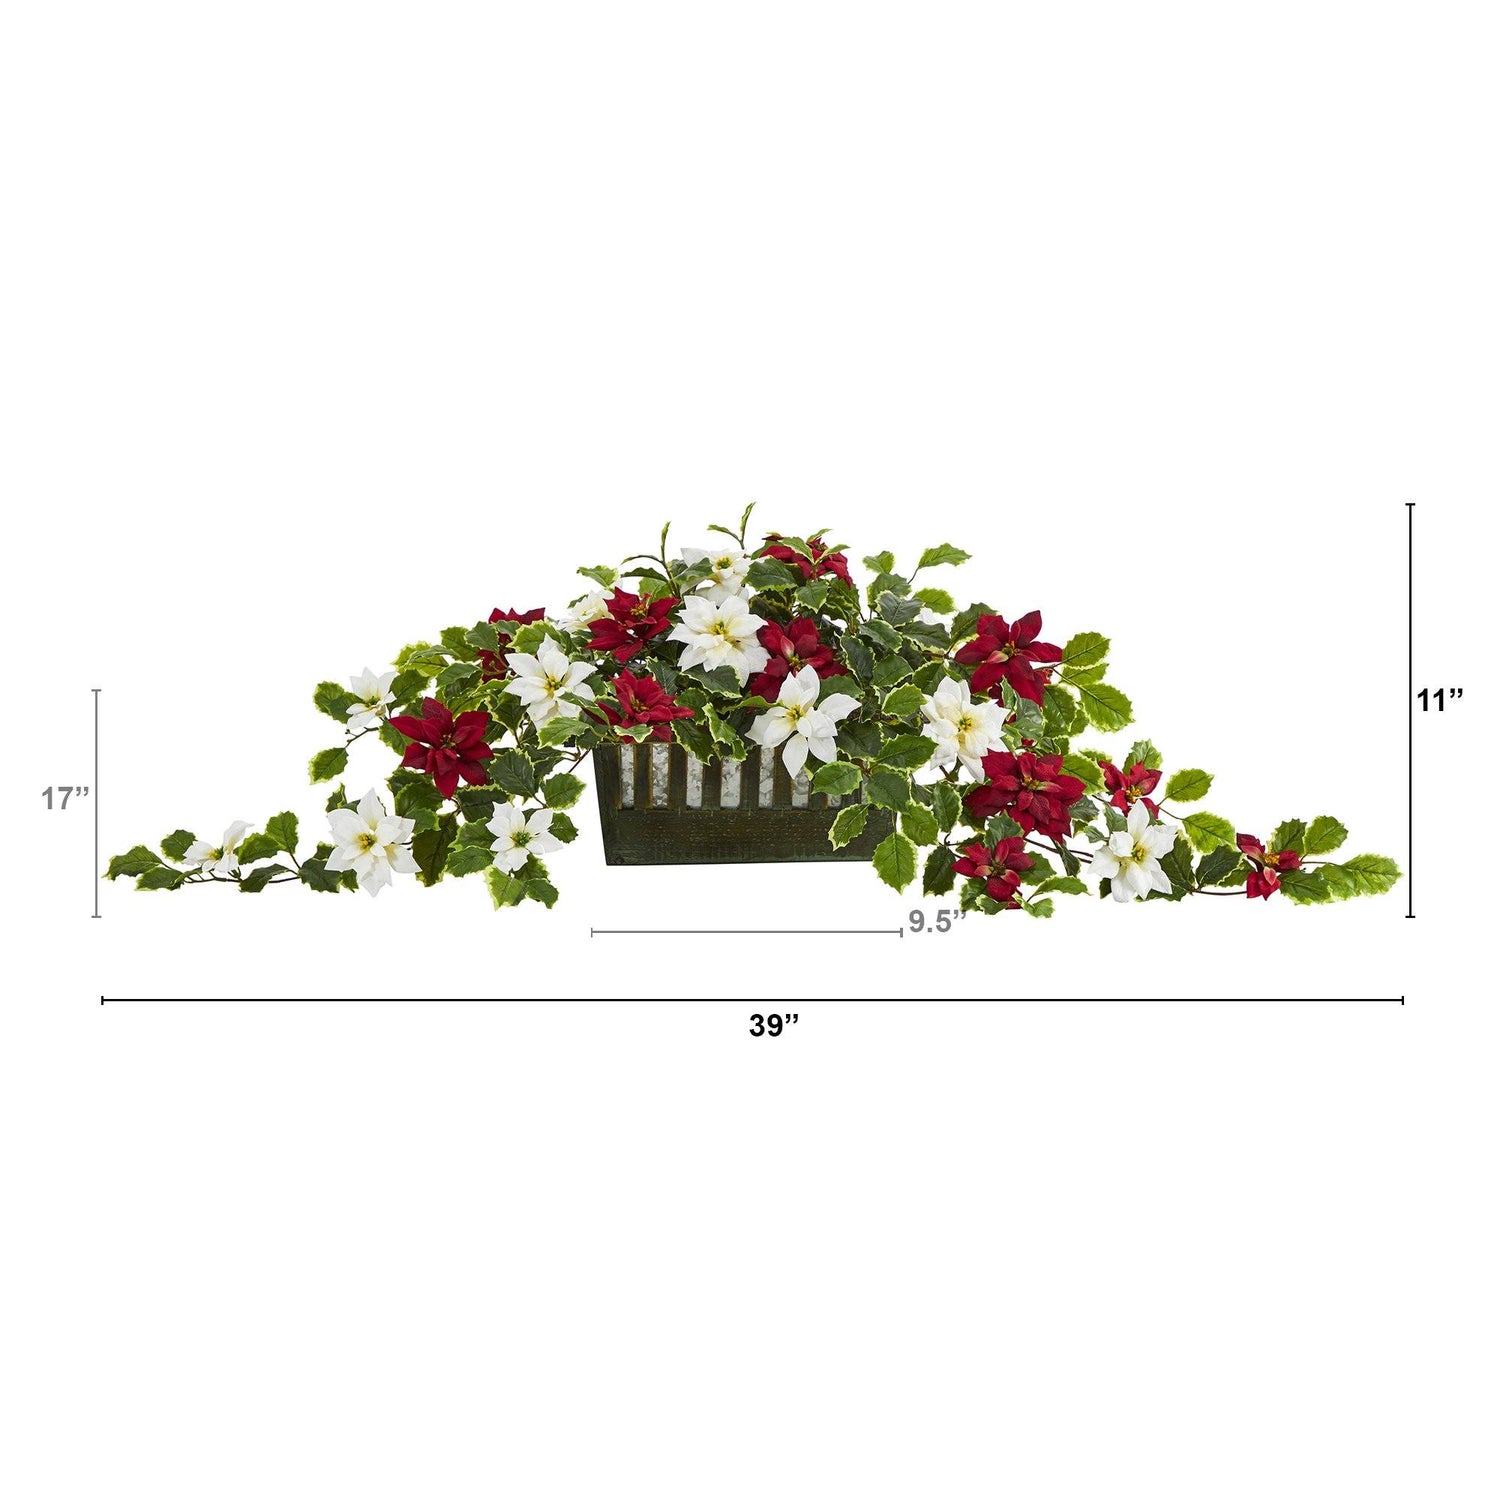 39” Poinsettia and Variegated Holly Artificial Plant in Decorative Planter (Real Touch)